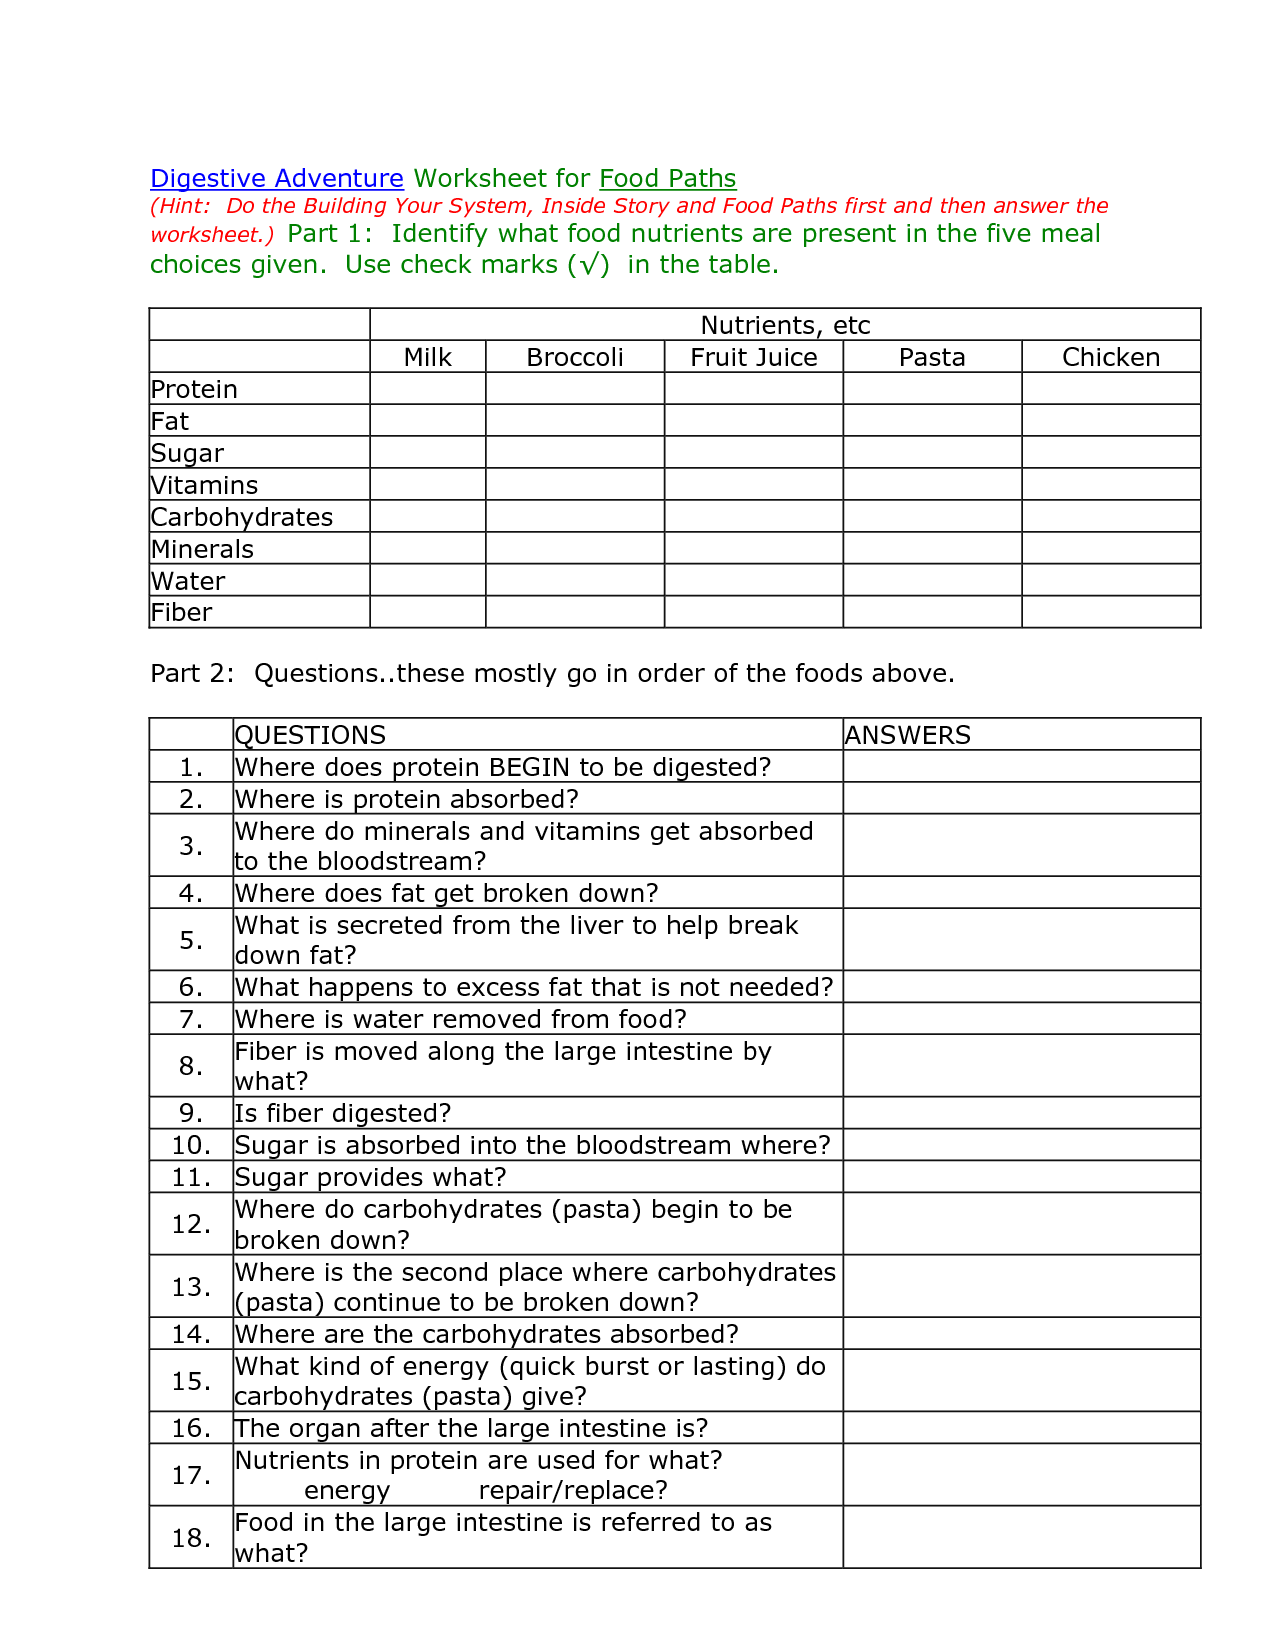 Digestive System Worksheets and Answers Image